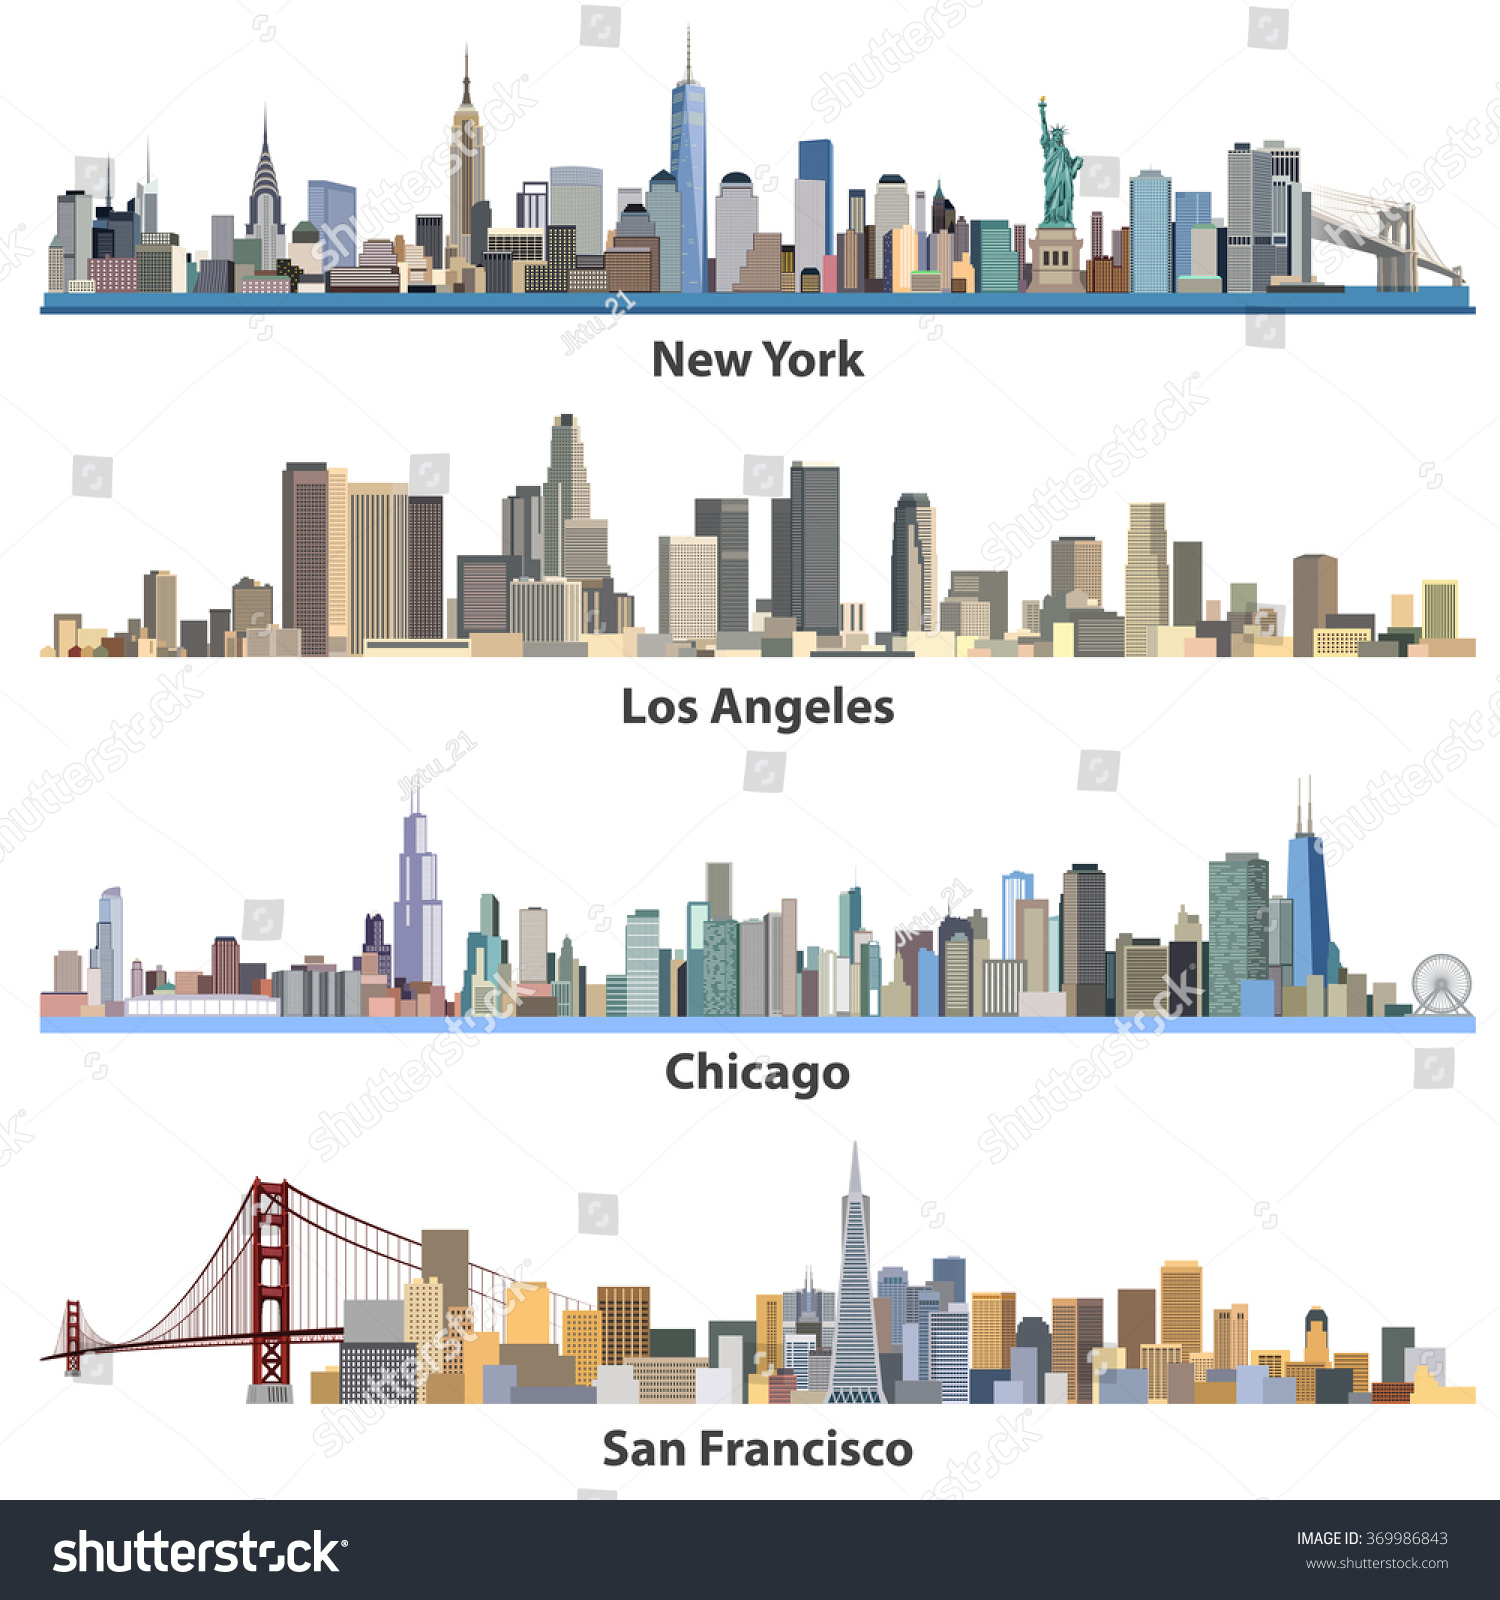 SVG of New York, Los Angeles, Chicago, San Francisco cities skylines. Collection of United States cityscapes vector illustrations svg